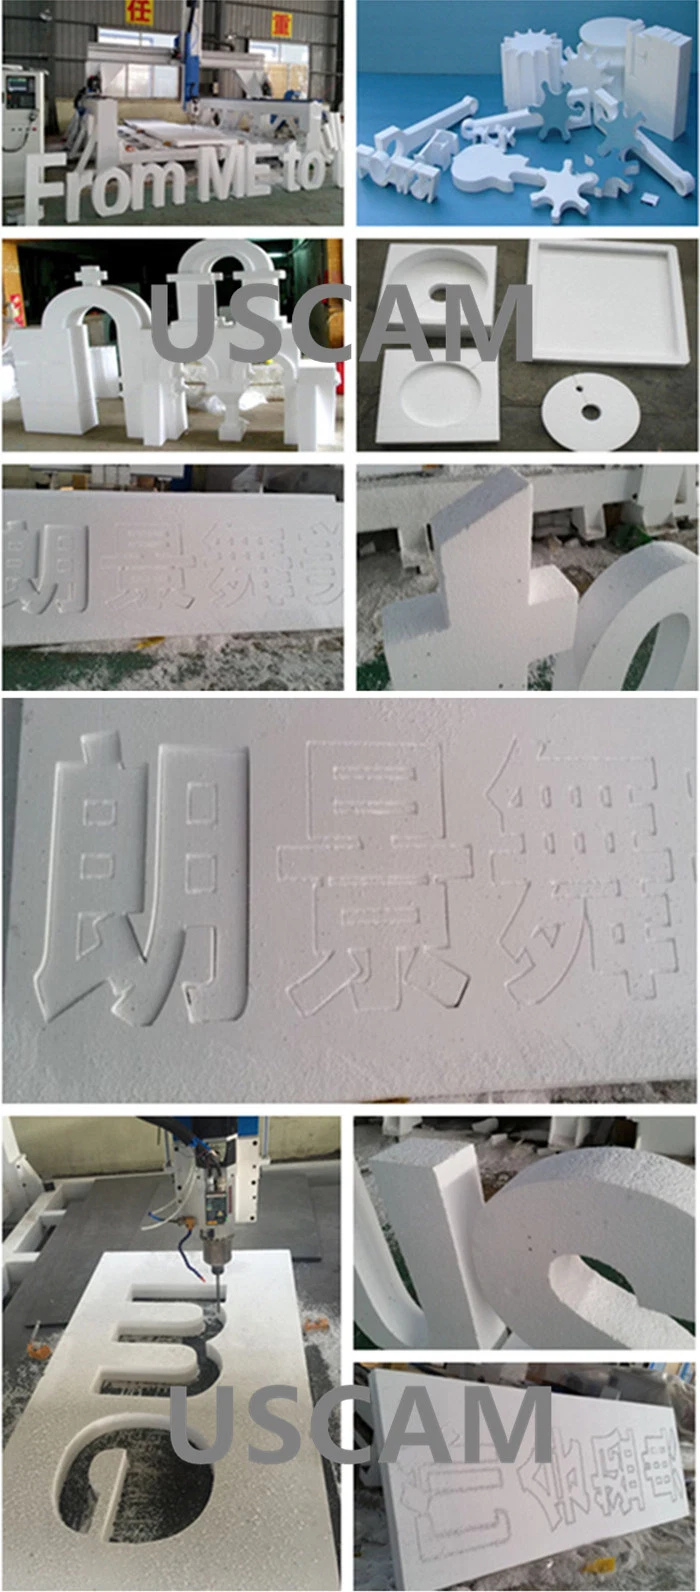 Factory 4 Axis Rotary Sculpture Wood Carving 3D Foam Cutting 1325 CNC Router Machine with CE FDA Certificate